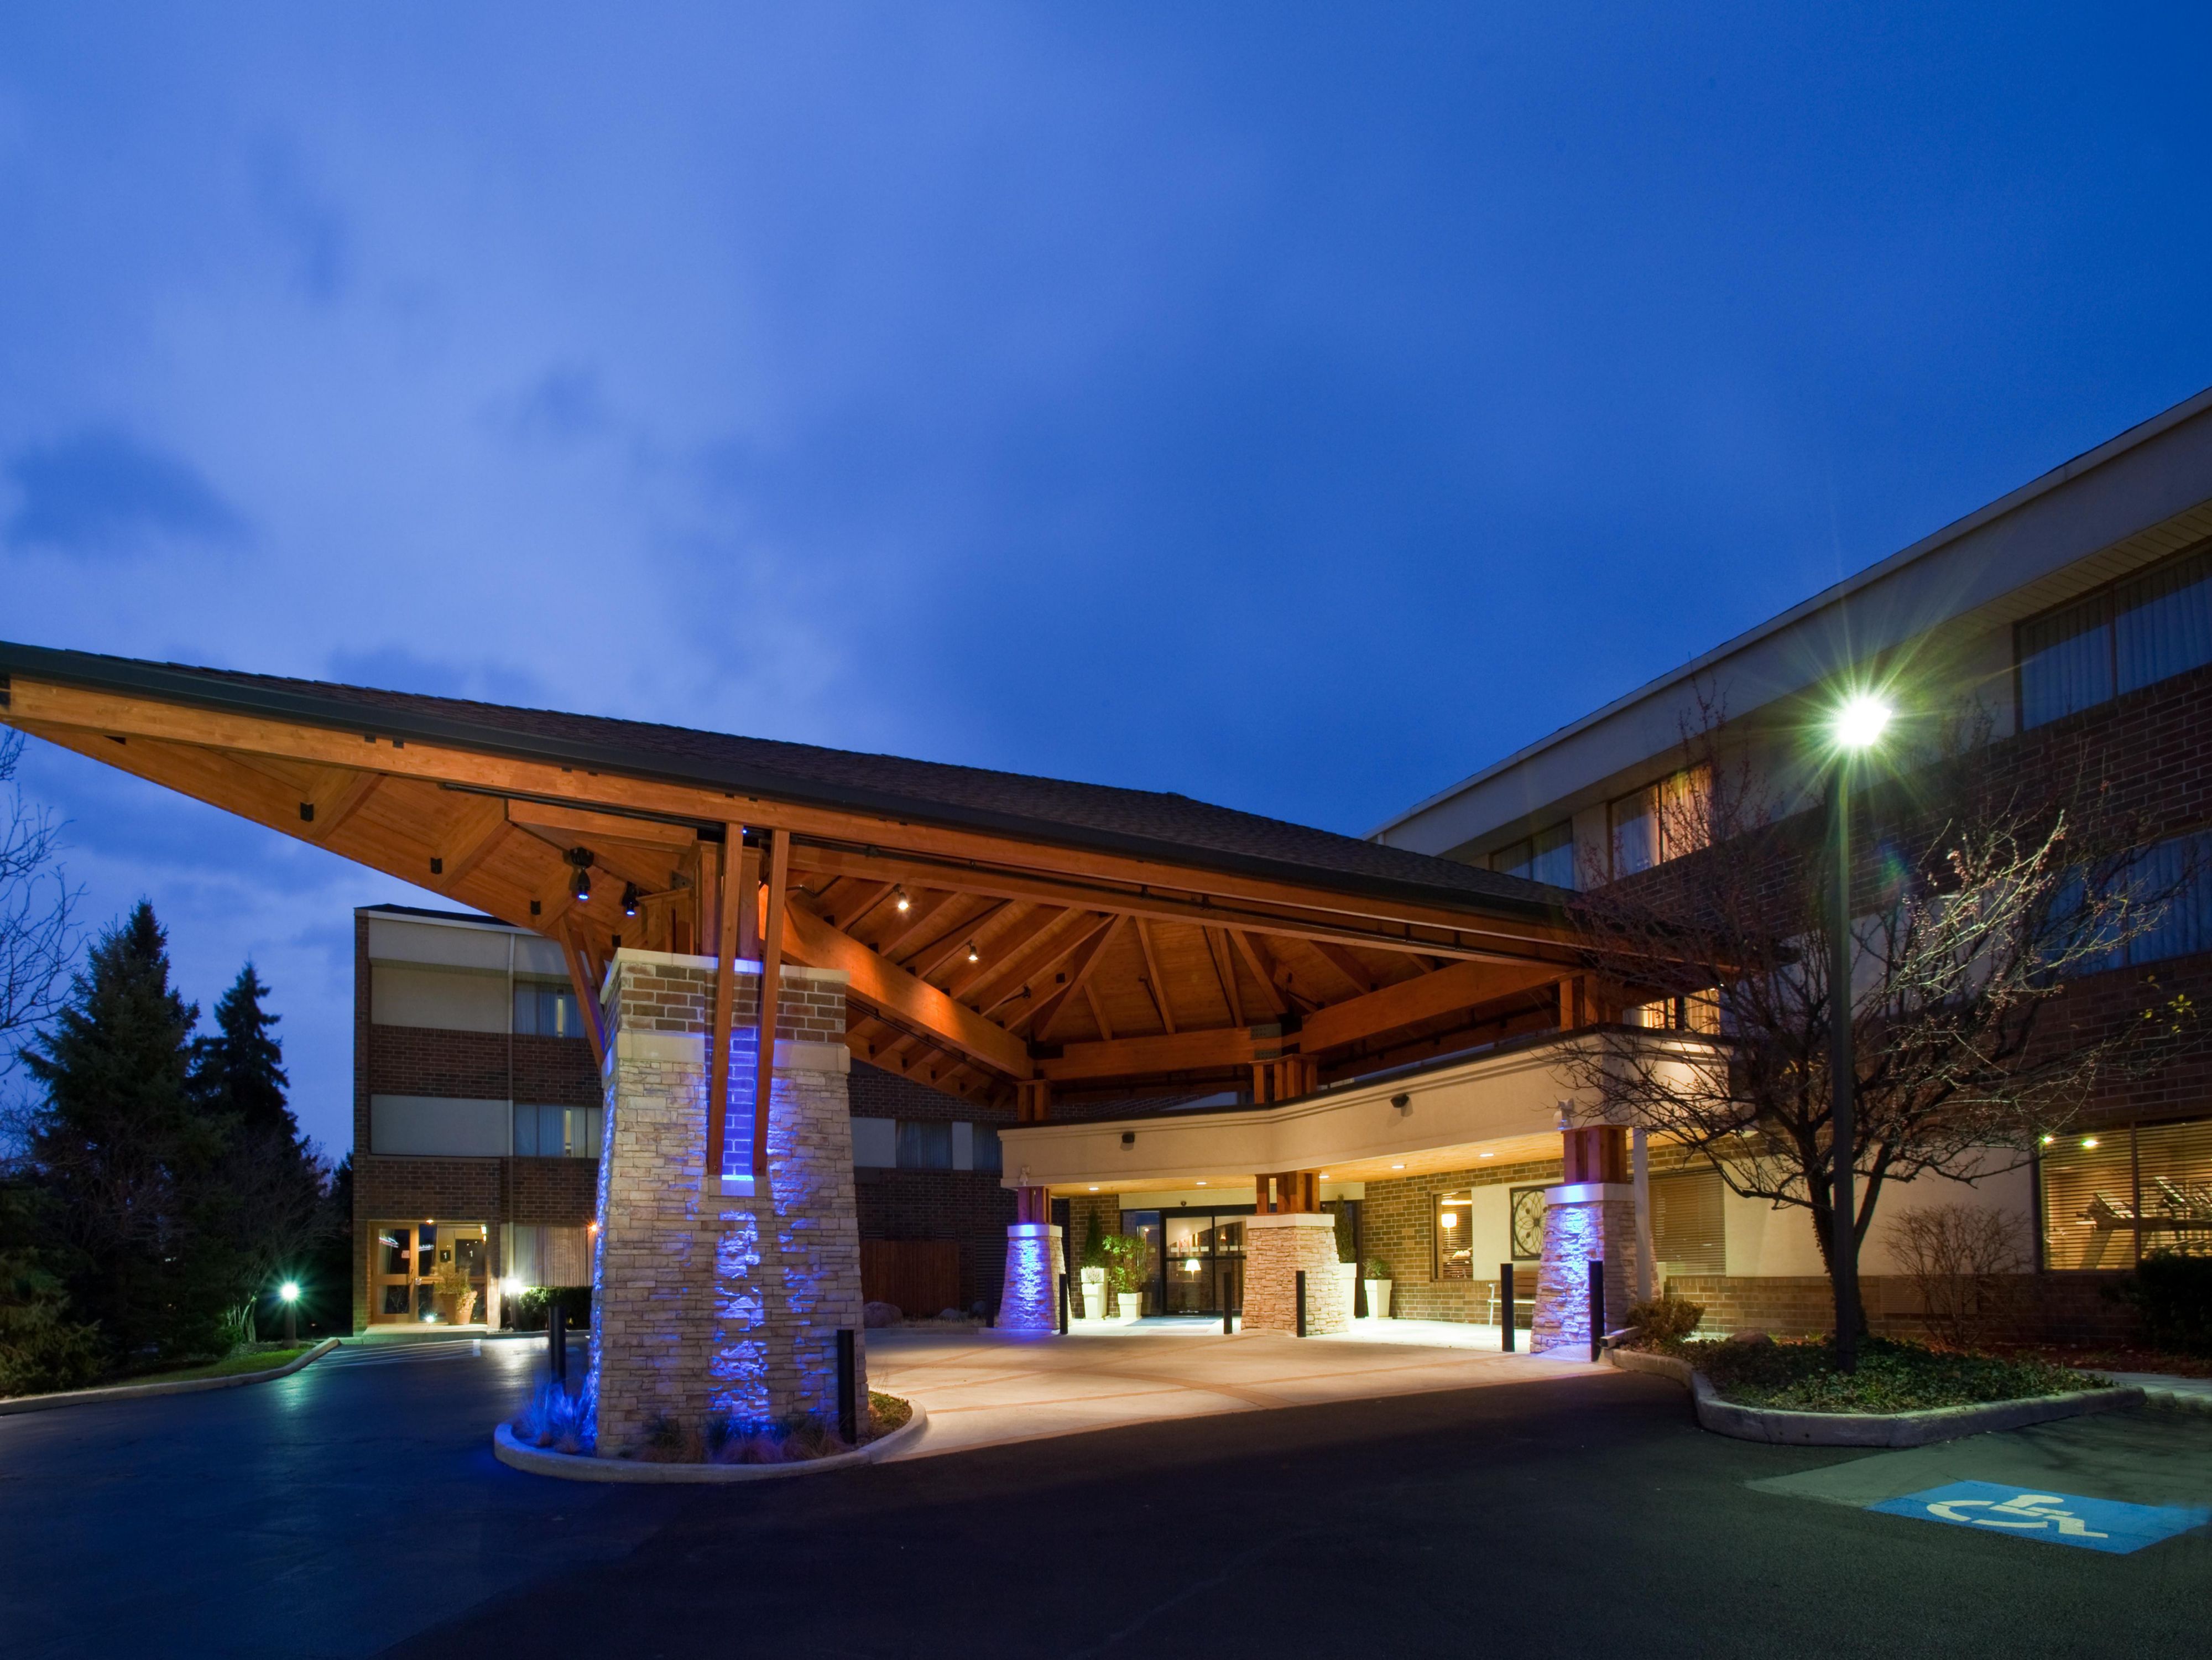 Hotels in Downers Grove, IL Near Chicago - Holiday Inn Express